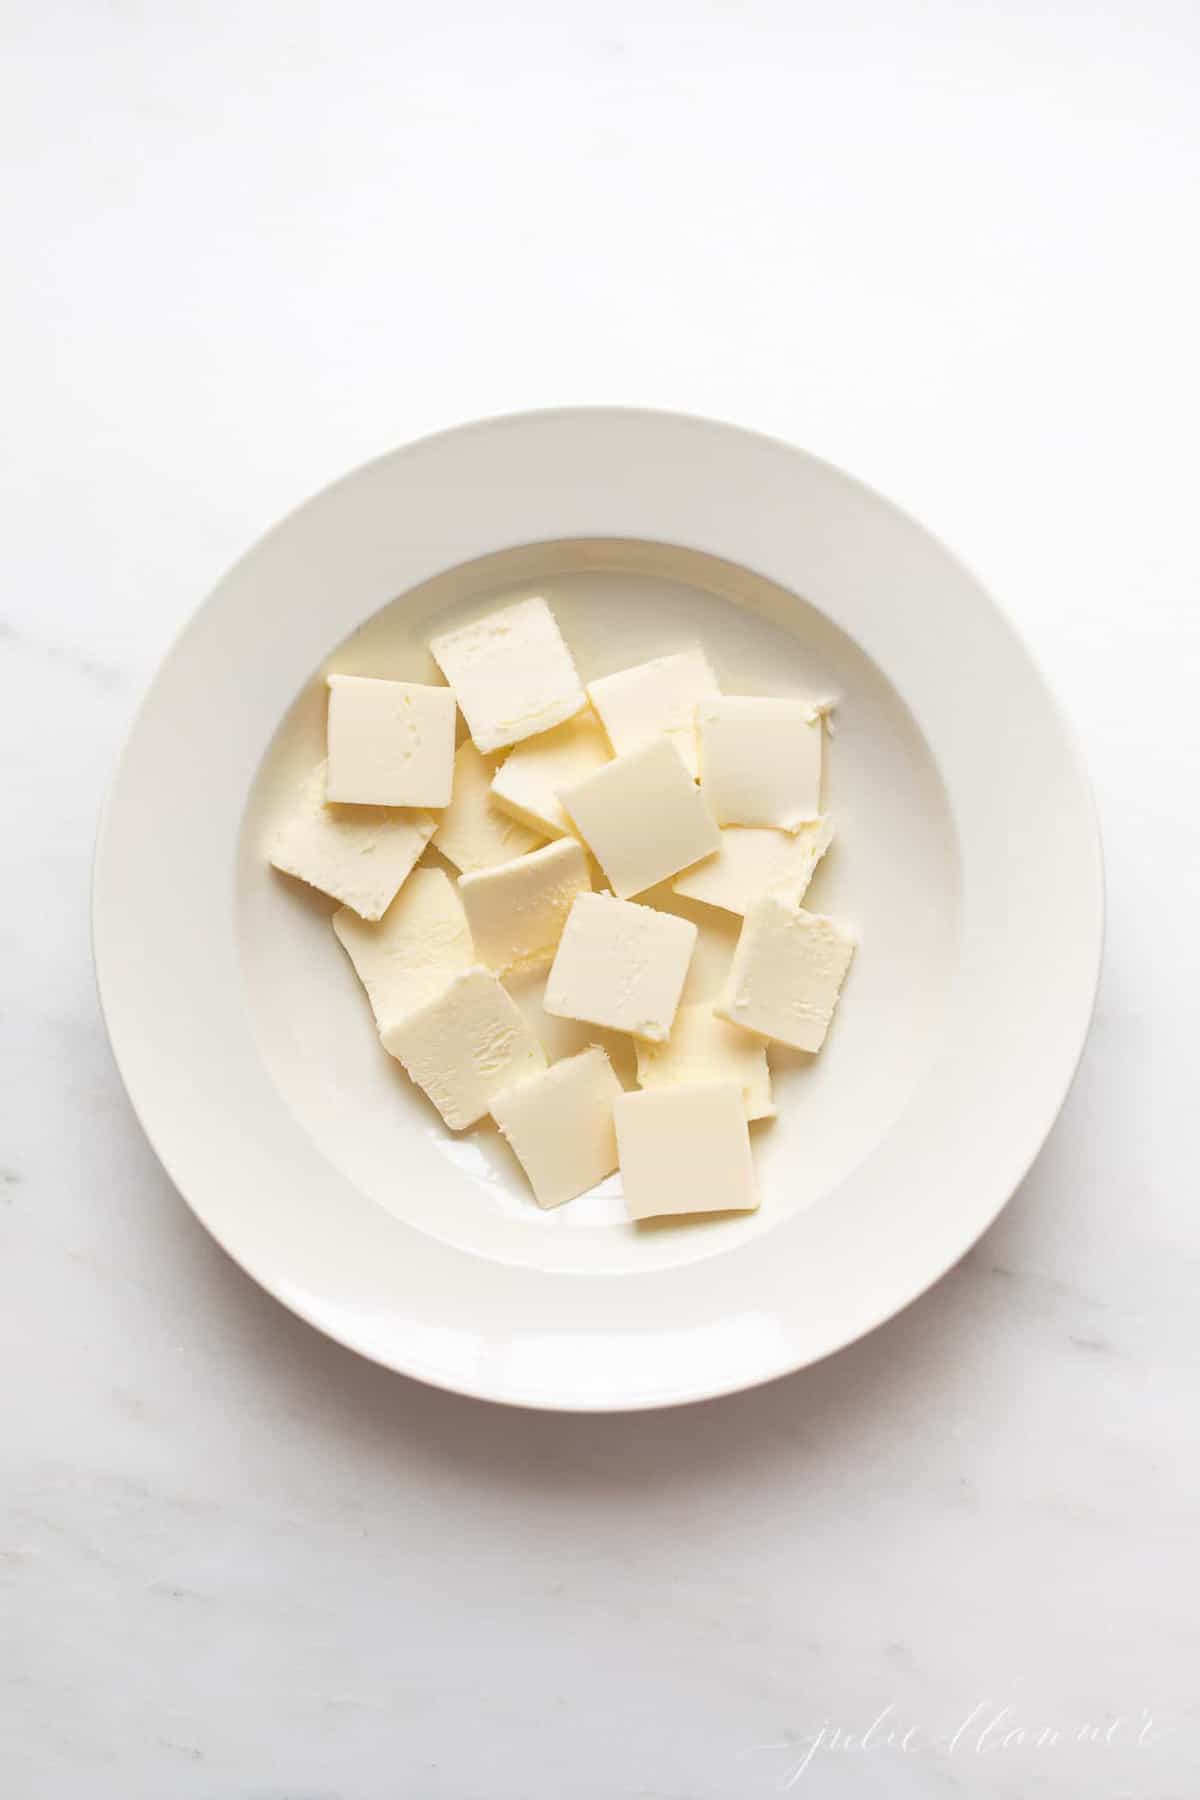 A white surface, with a white plate full of cuts of cold butter.